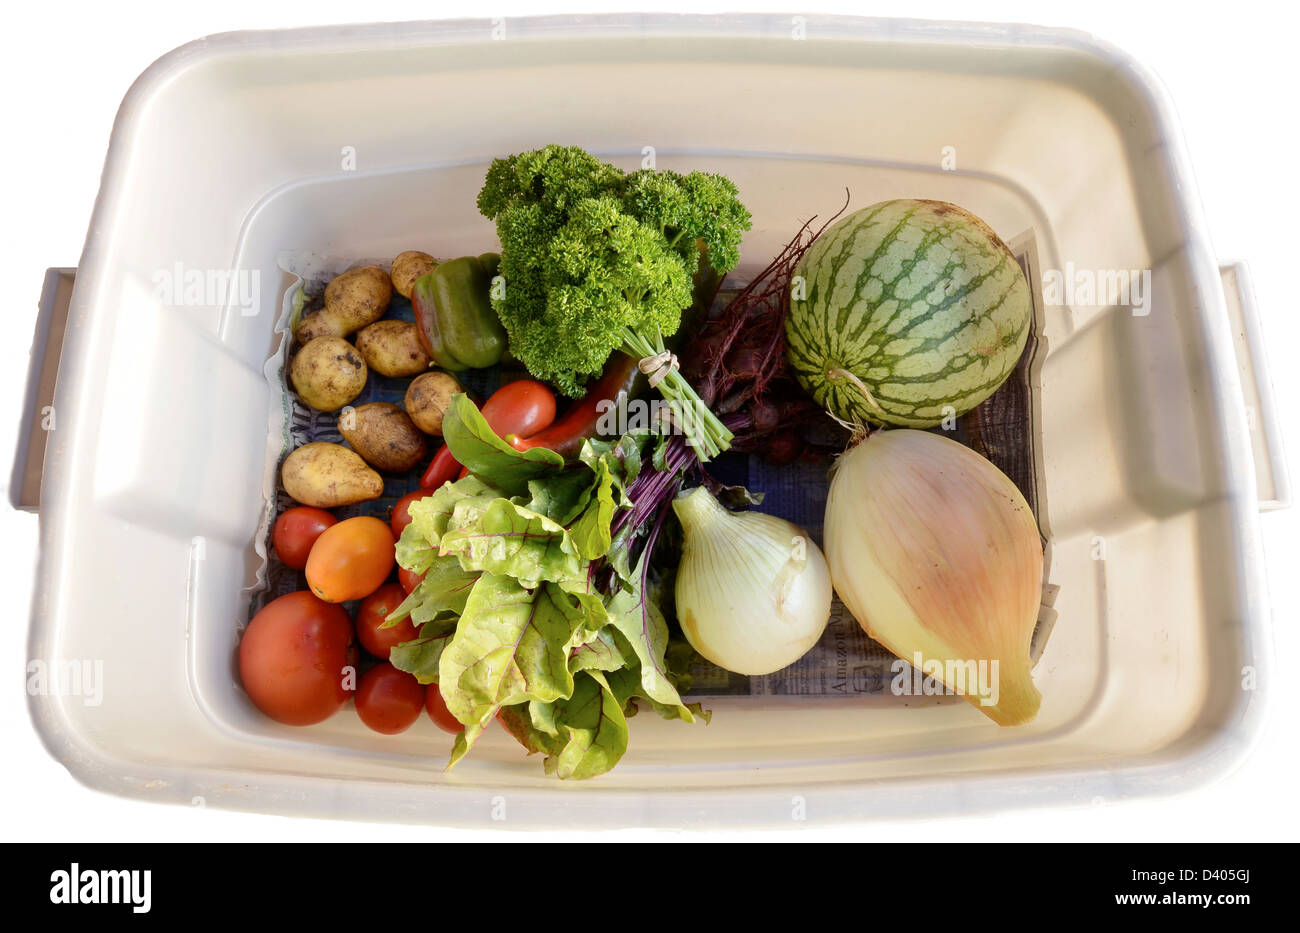 Plastic bin with a CSA (Community Supported Agriculture) share of freshly harvested produce from a farm in Joseph, Oregon. Stock Photo